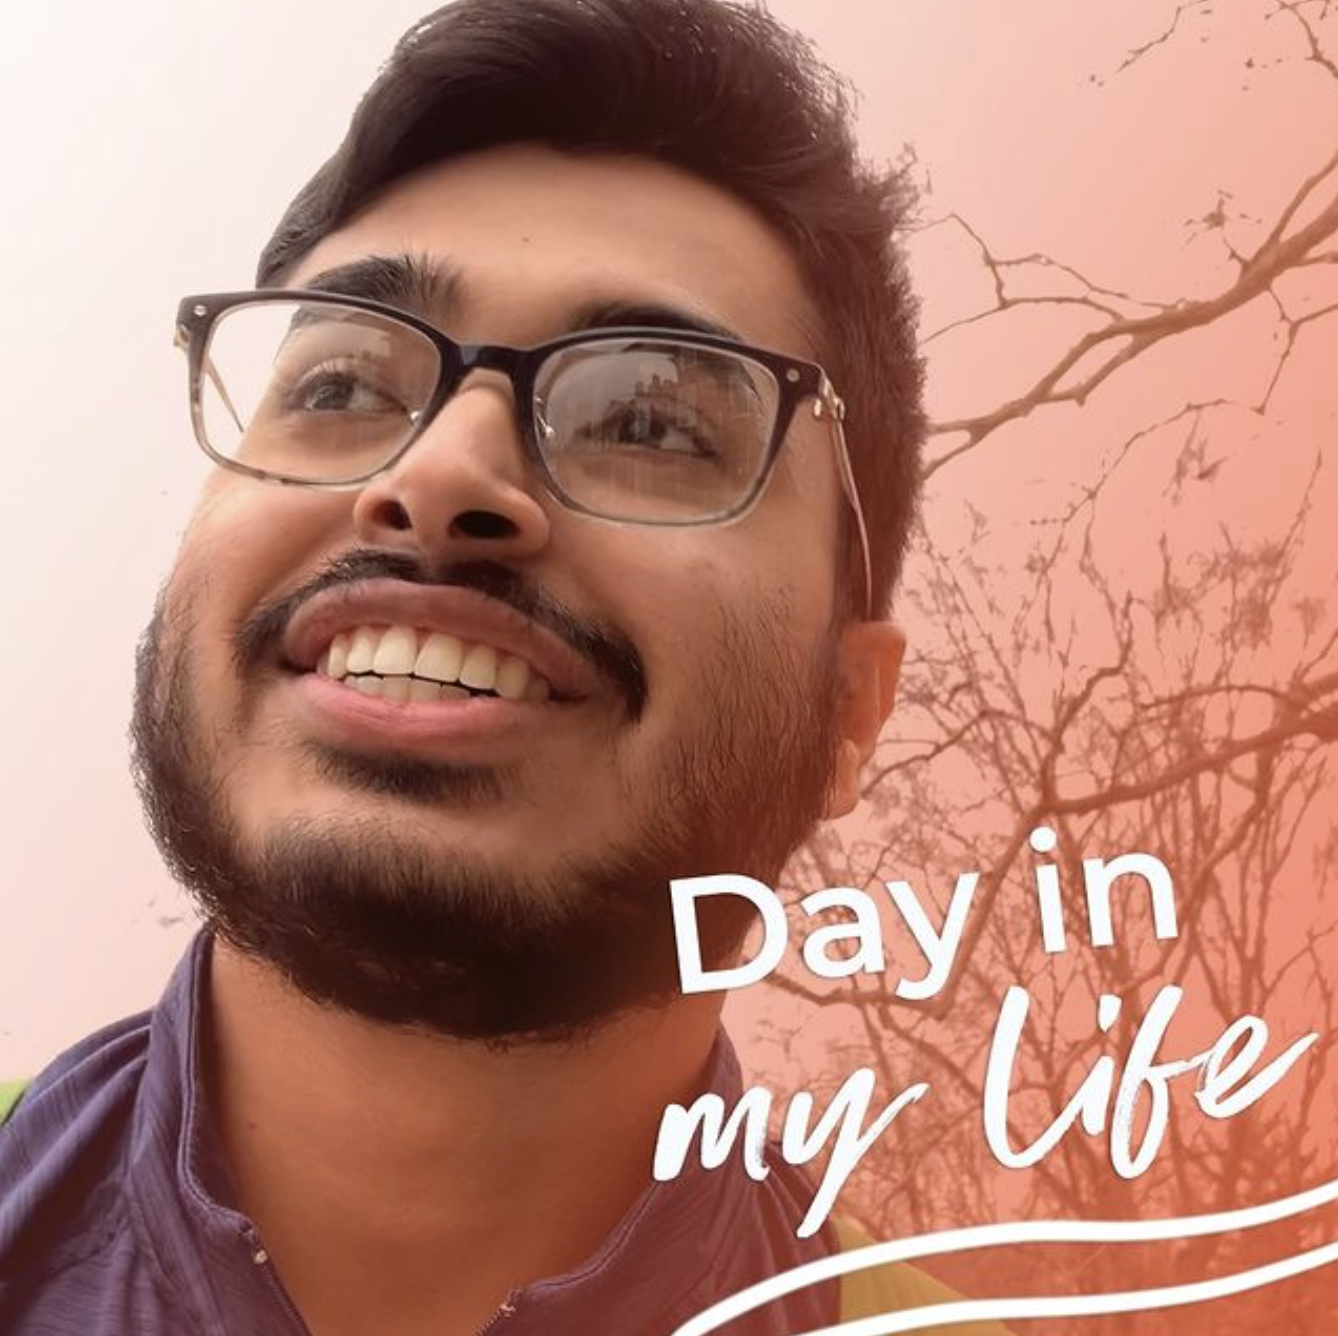 Maaz smiles looking off to the side. Text below reads "Day in my life."